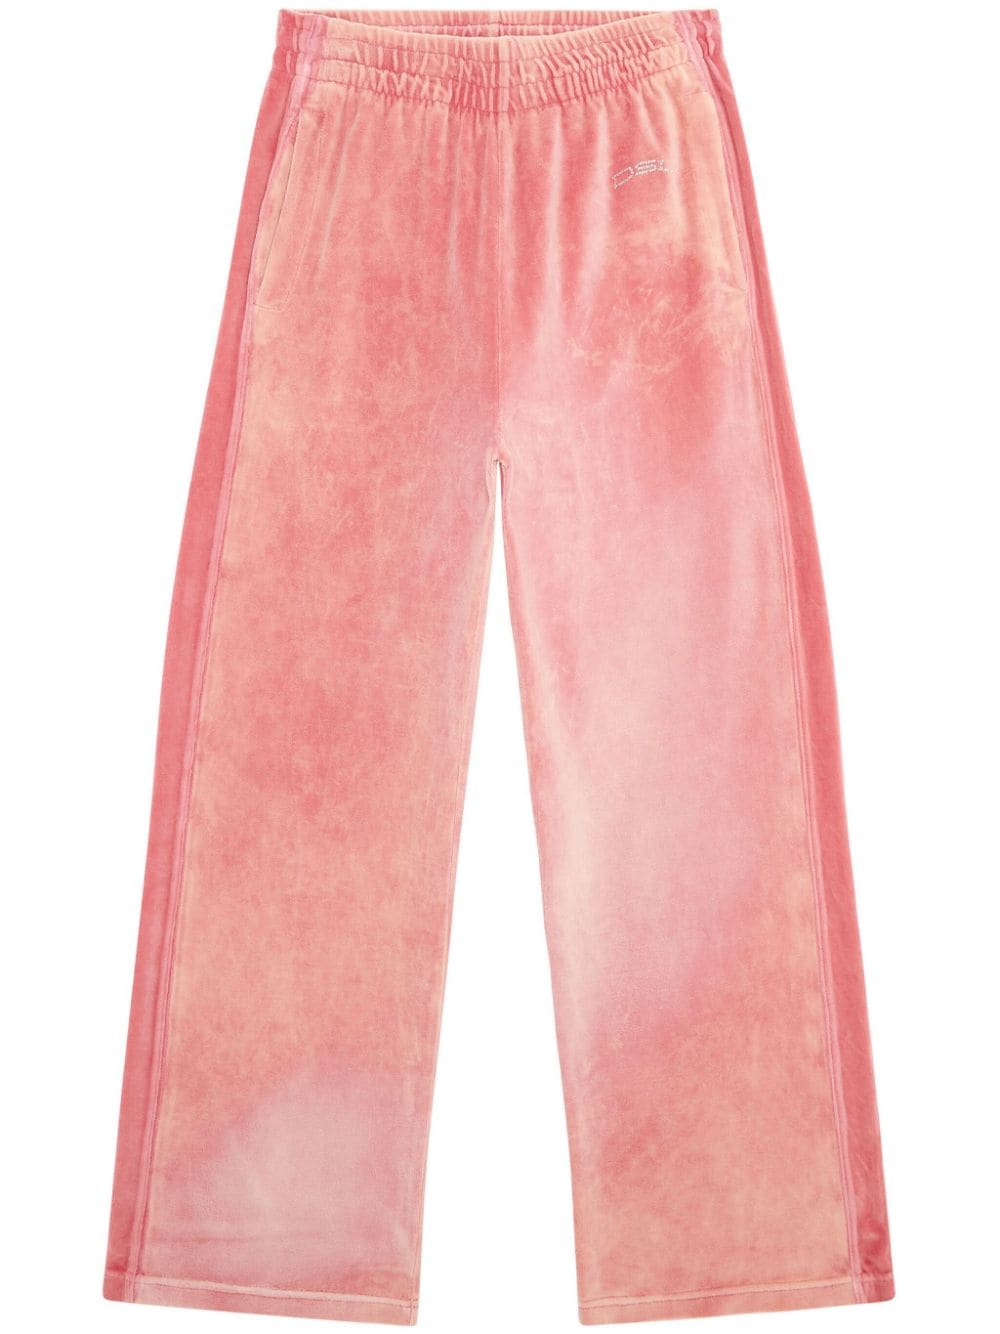 Image 1 of Diesel P-Martyn chenille track pants